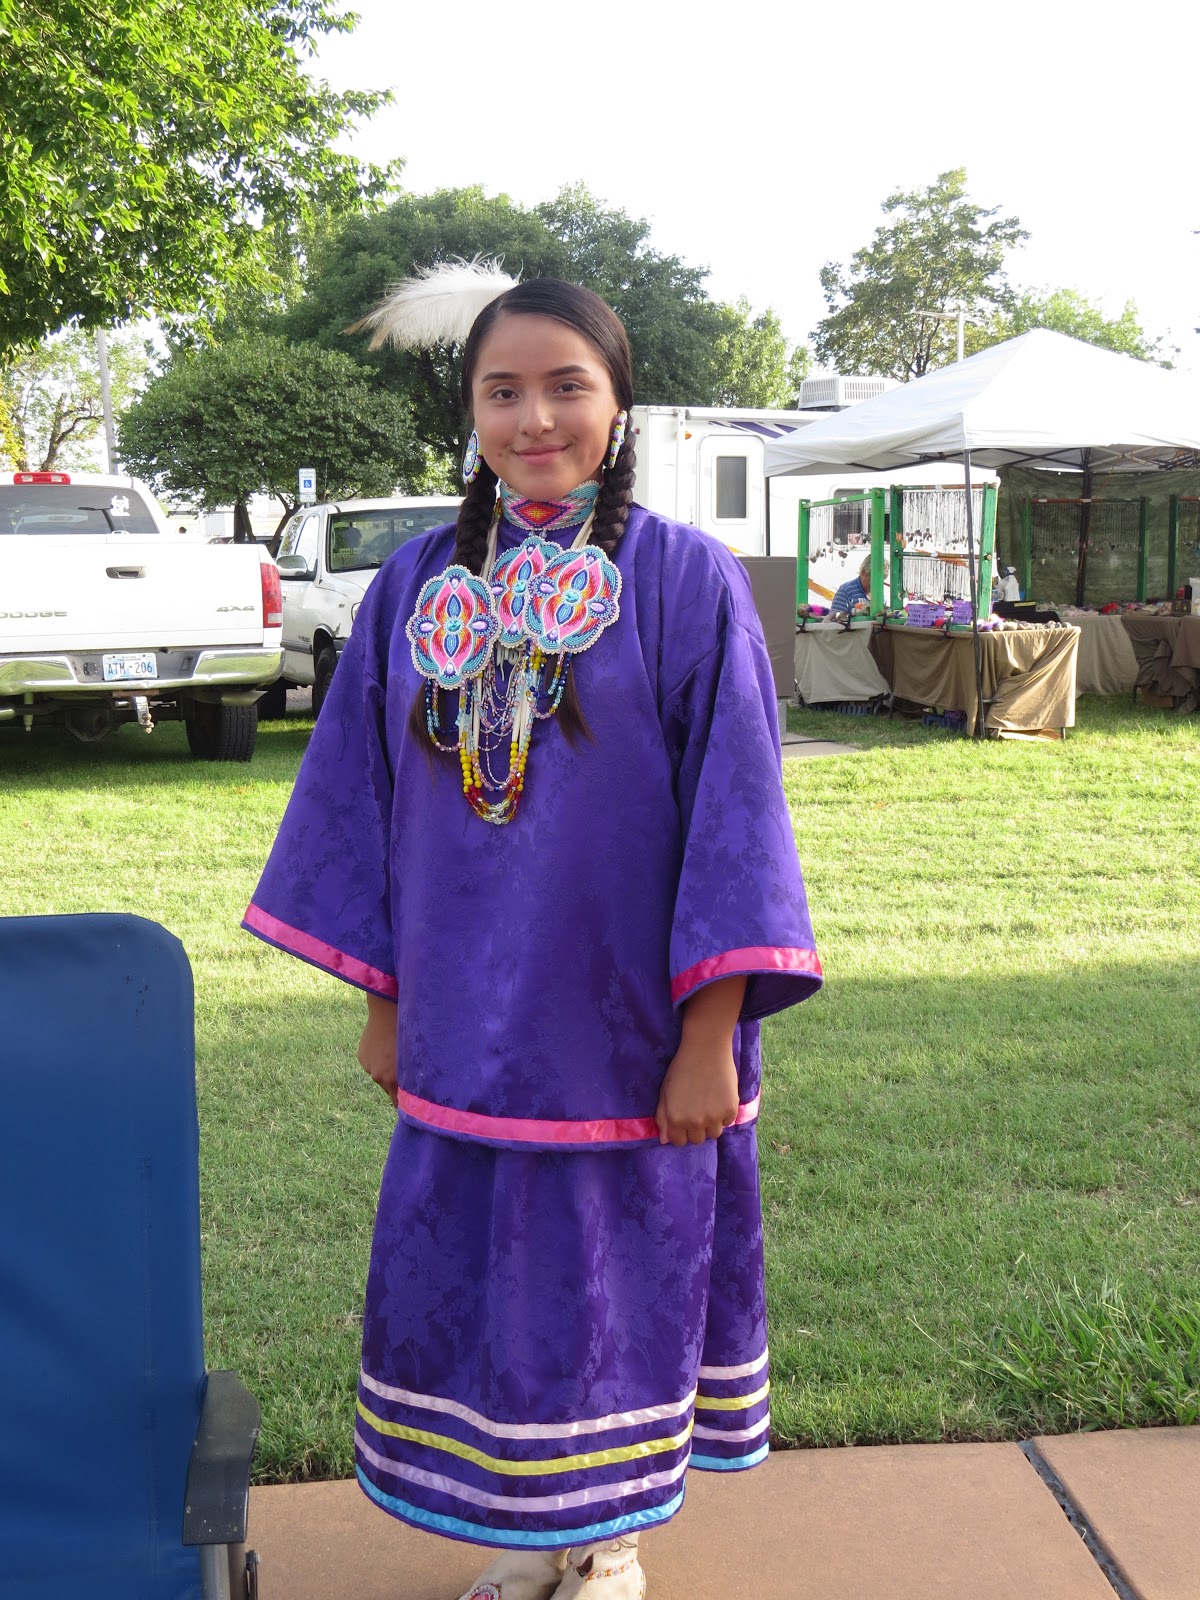 Sooner Ranch Mission: Standing Bear Pow Wow